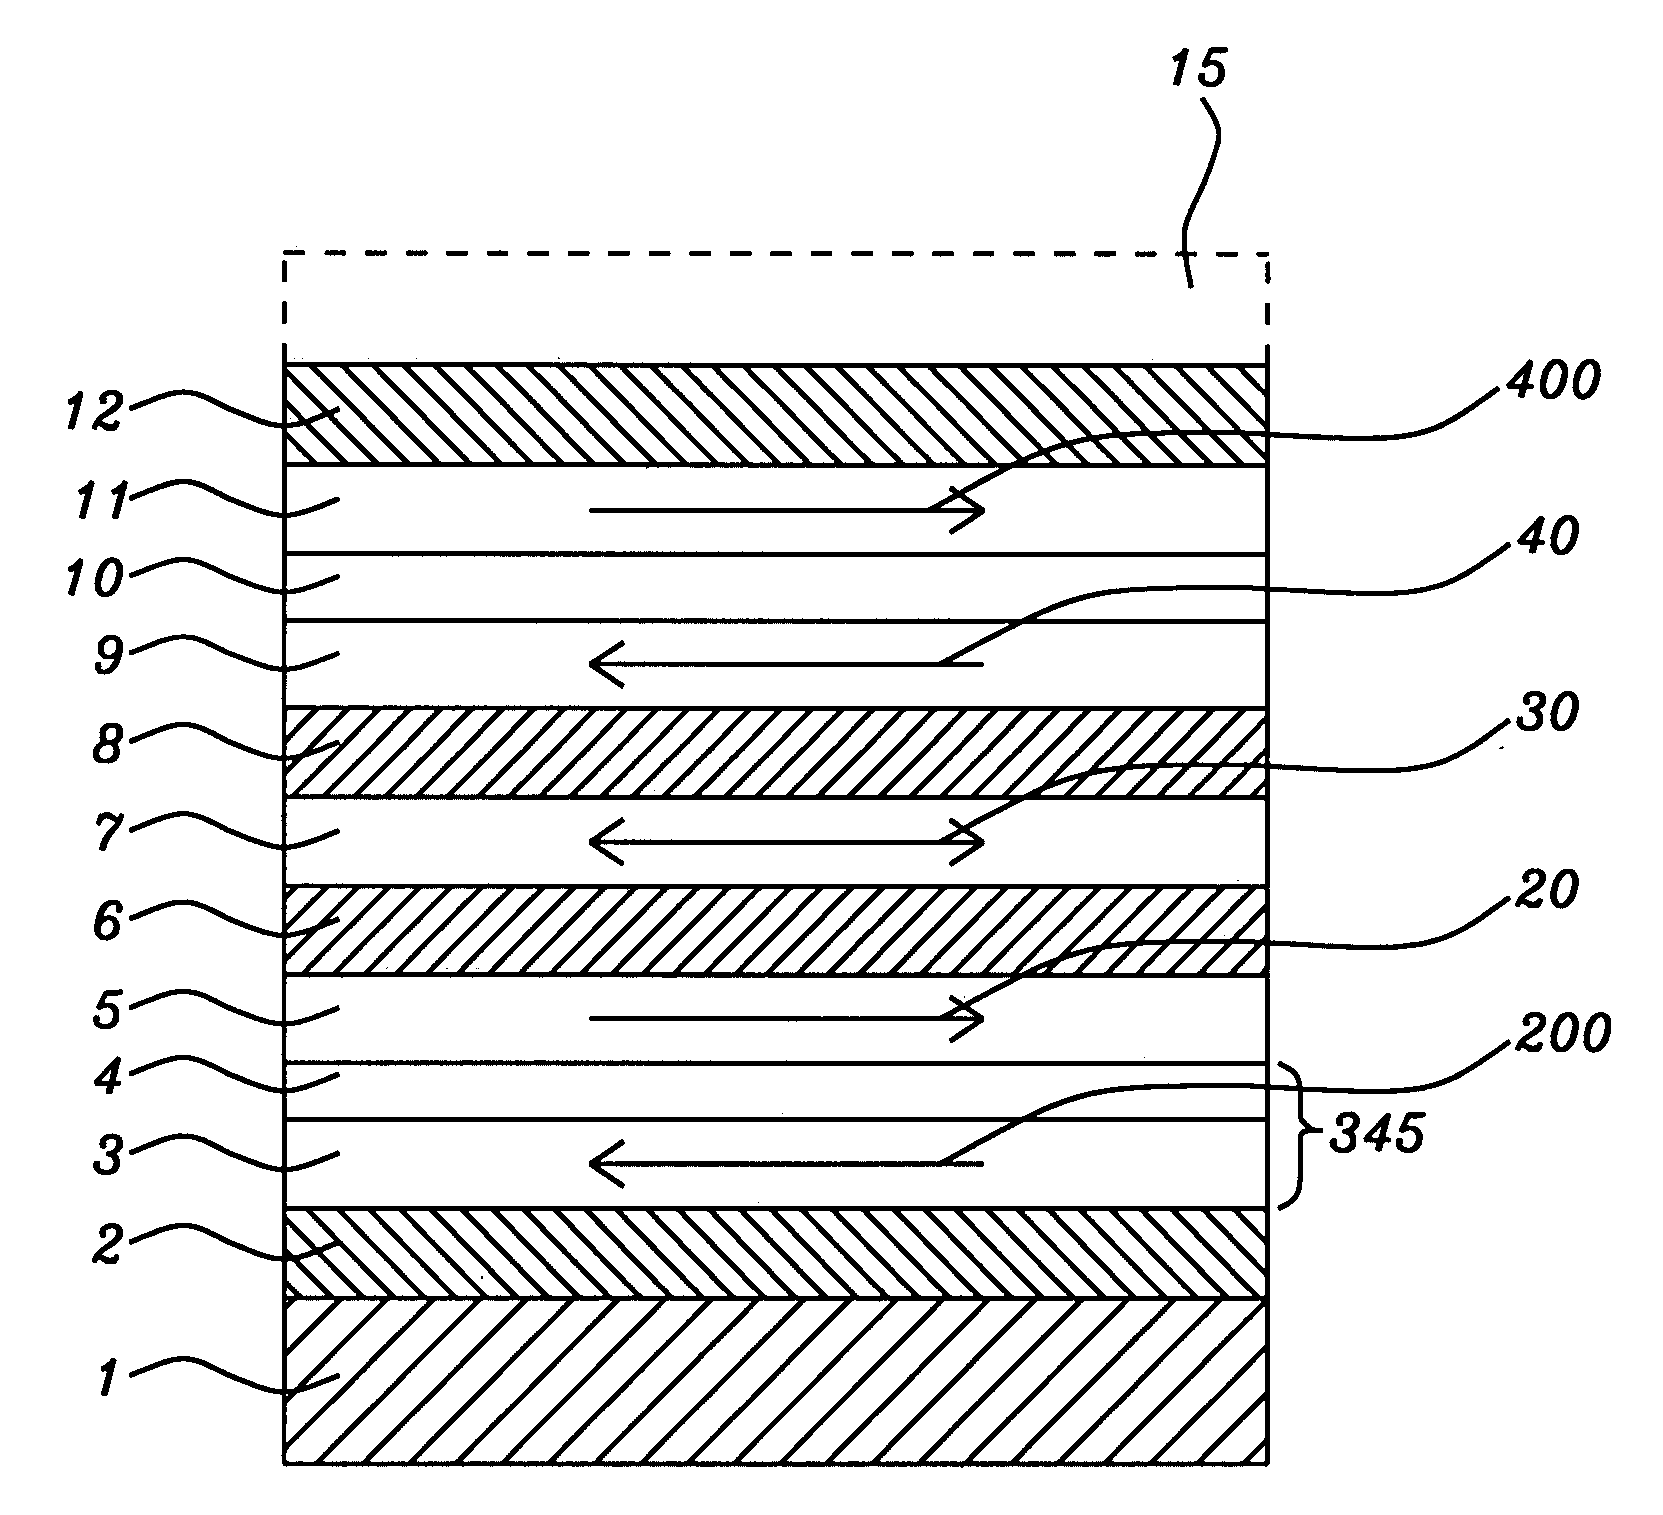 Spin transfer MRAM device with novel magnetic free layer